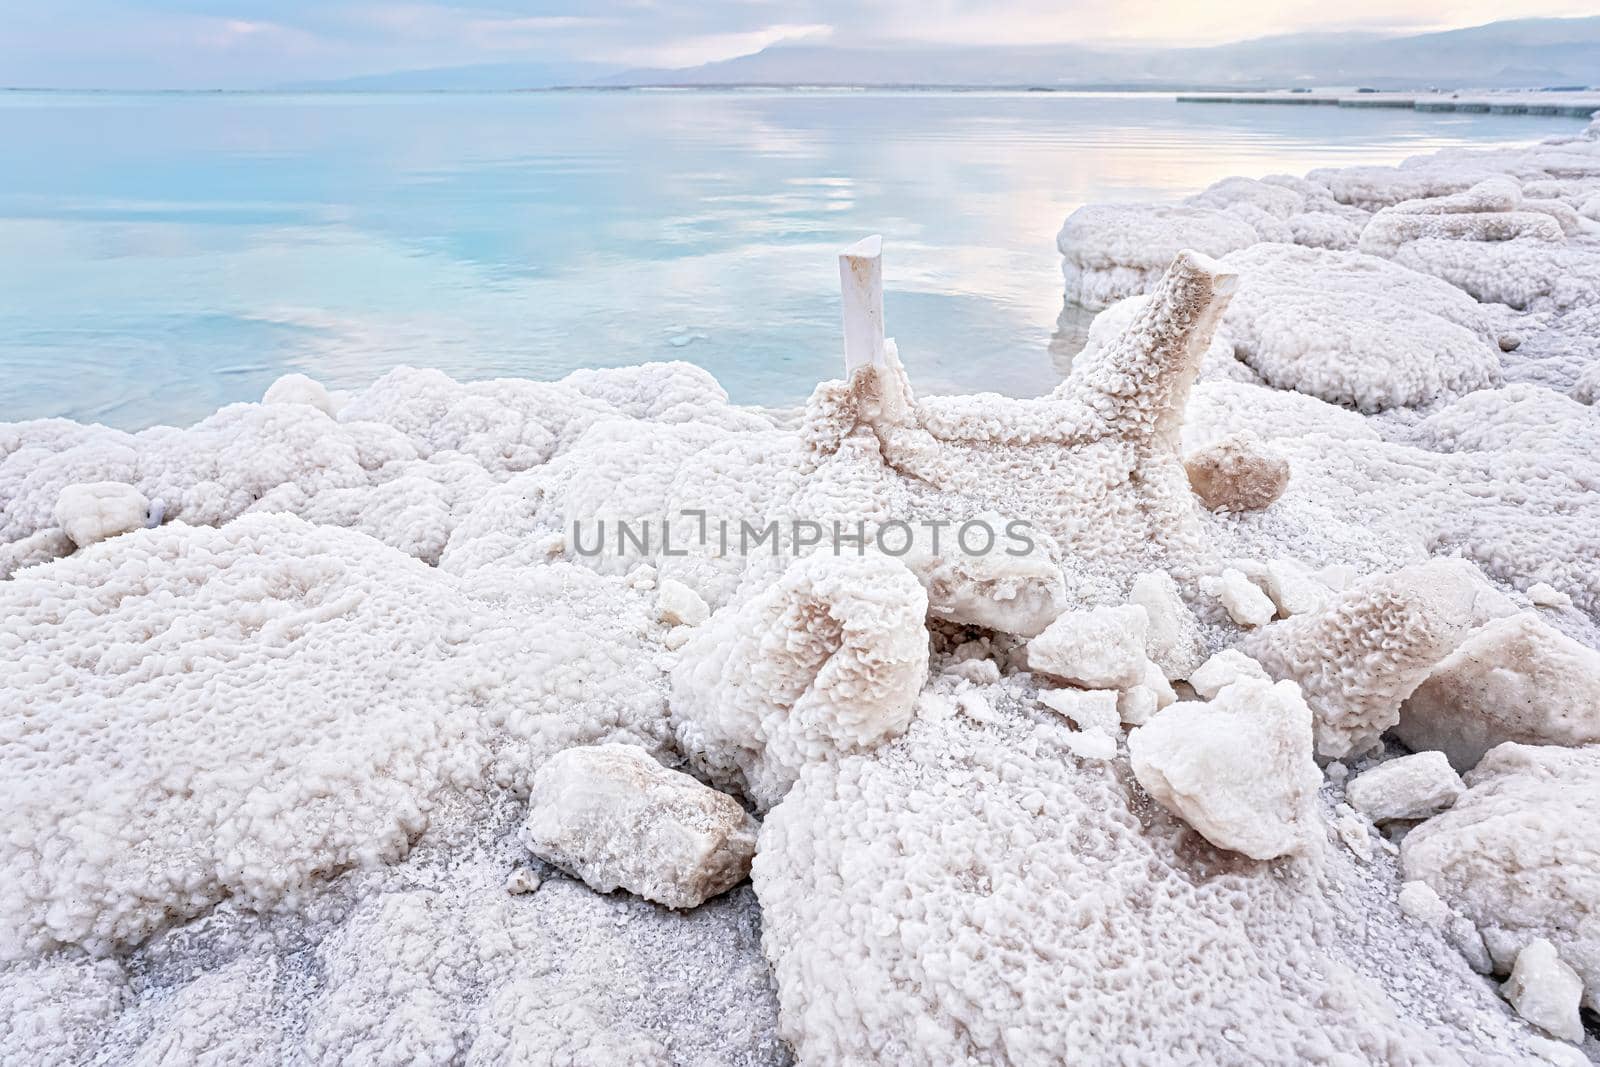 Small plastic chairs completely covered with crystalline salt on shore of dead sea, closeup detail, clear blue water near by Ivanko